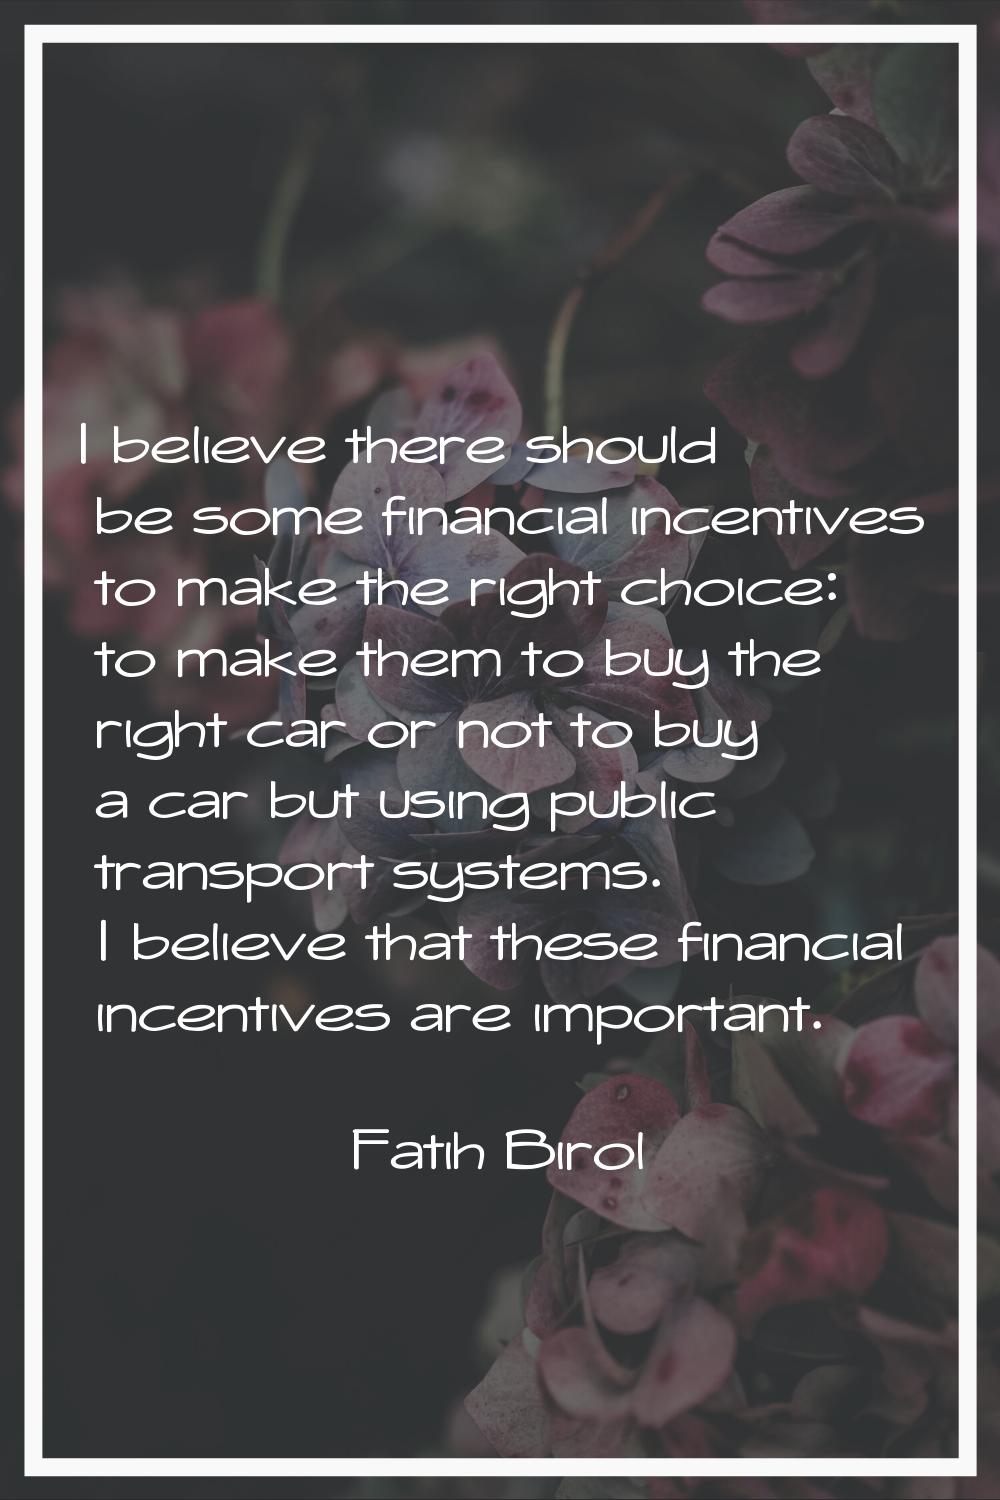 I believe there should be some financial incentives to make the right choice: to make them to buy t